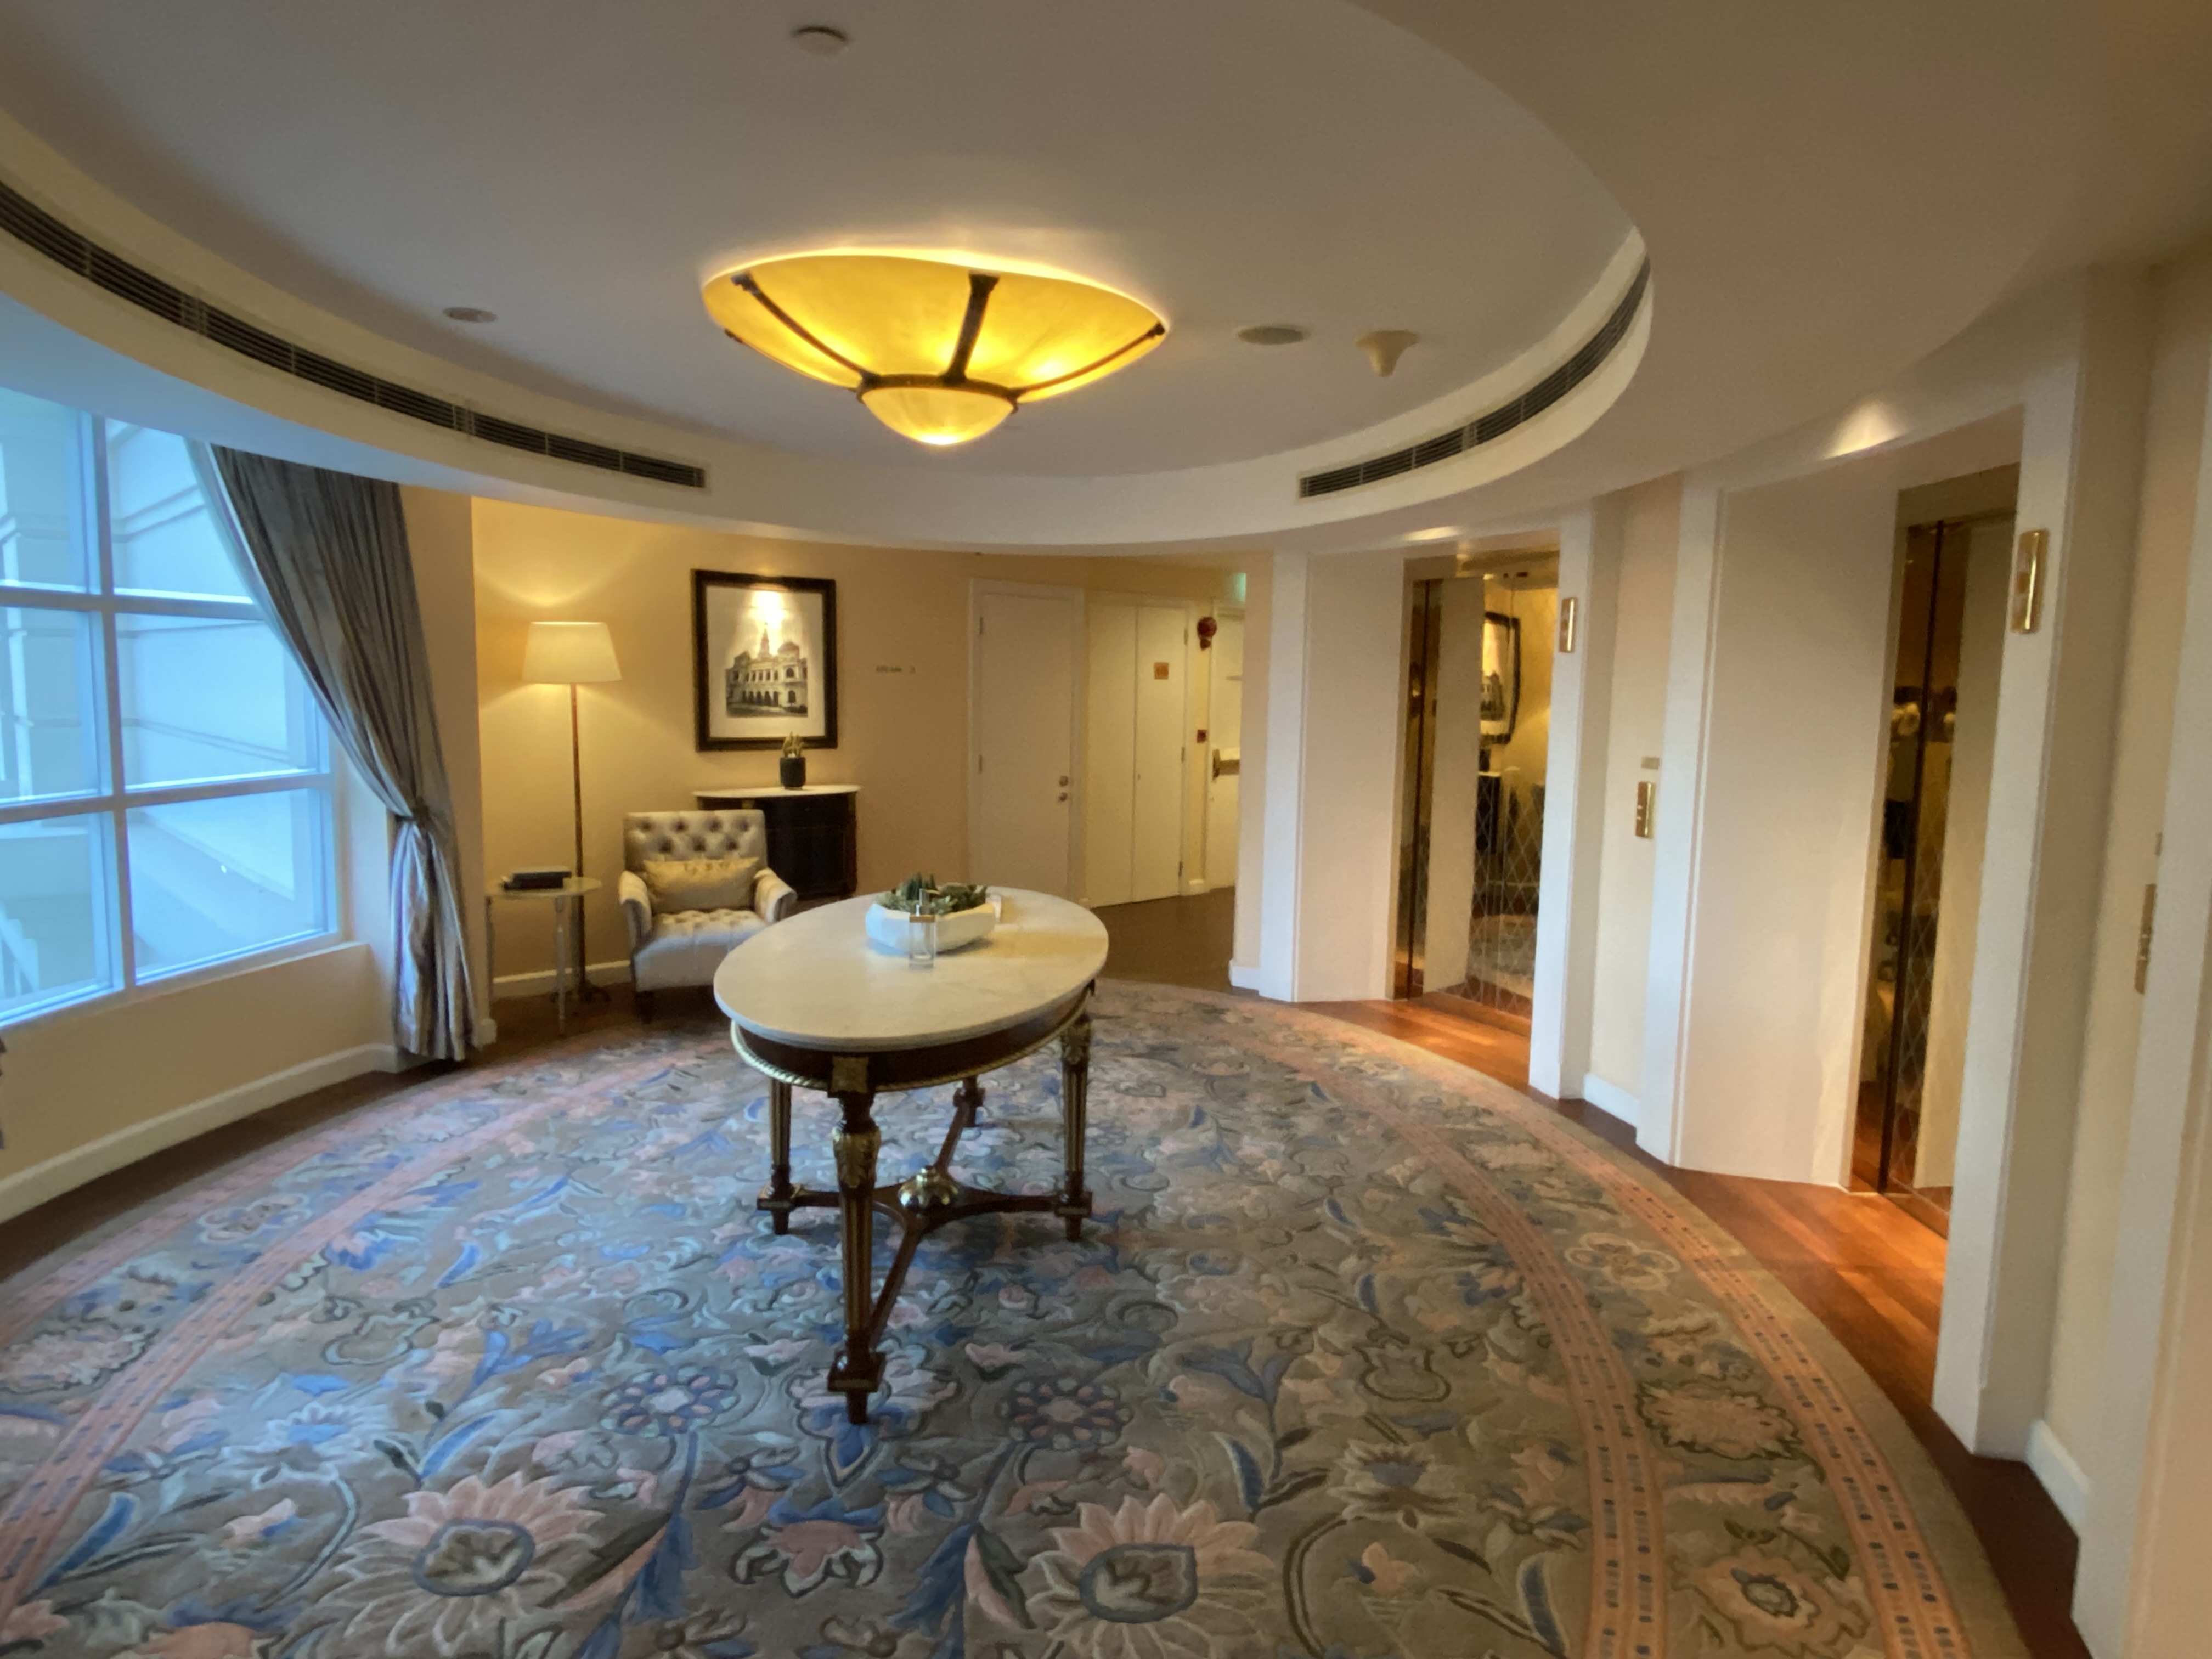 a room with a round table and a round carpet